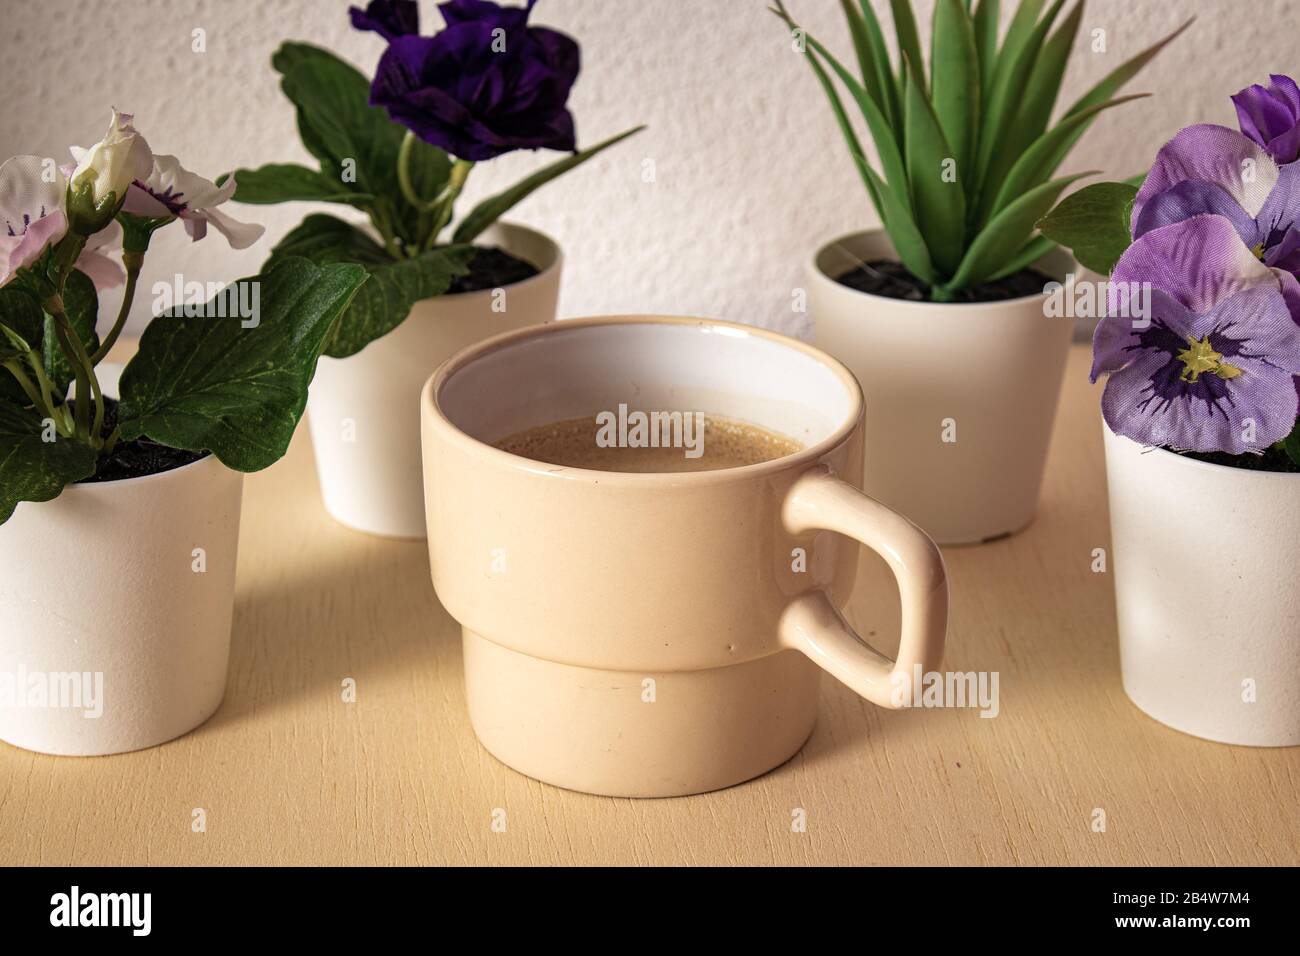 This scene features a set of five items, four plants in white little pots and one coffee in a light brown cup. The items stand on a wooden board with Stock Photo